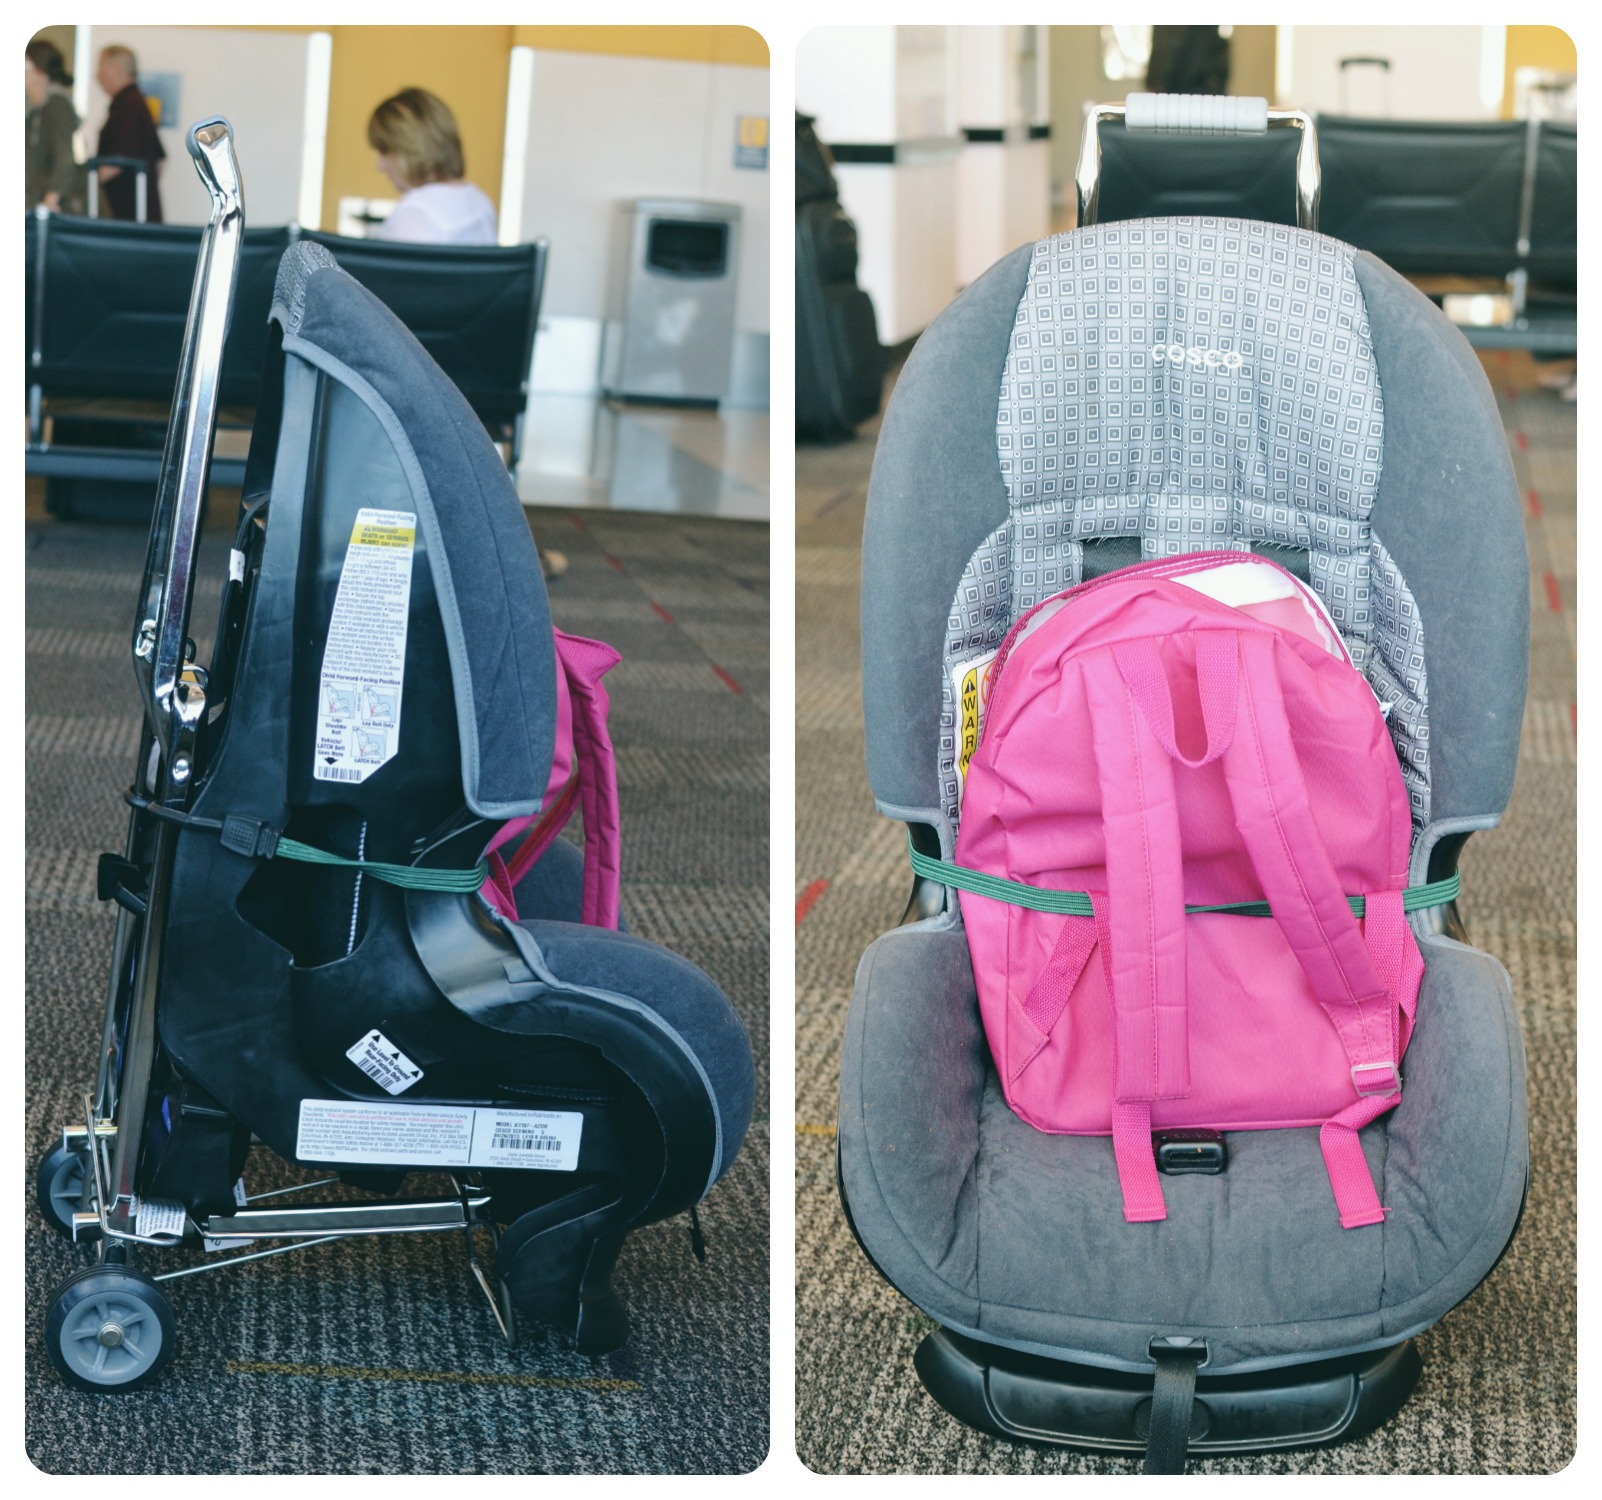 Traveling with Car Seats in the Airport